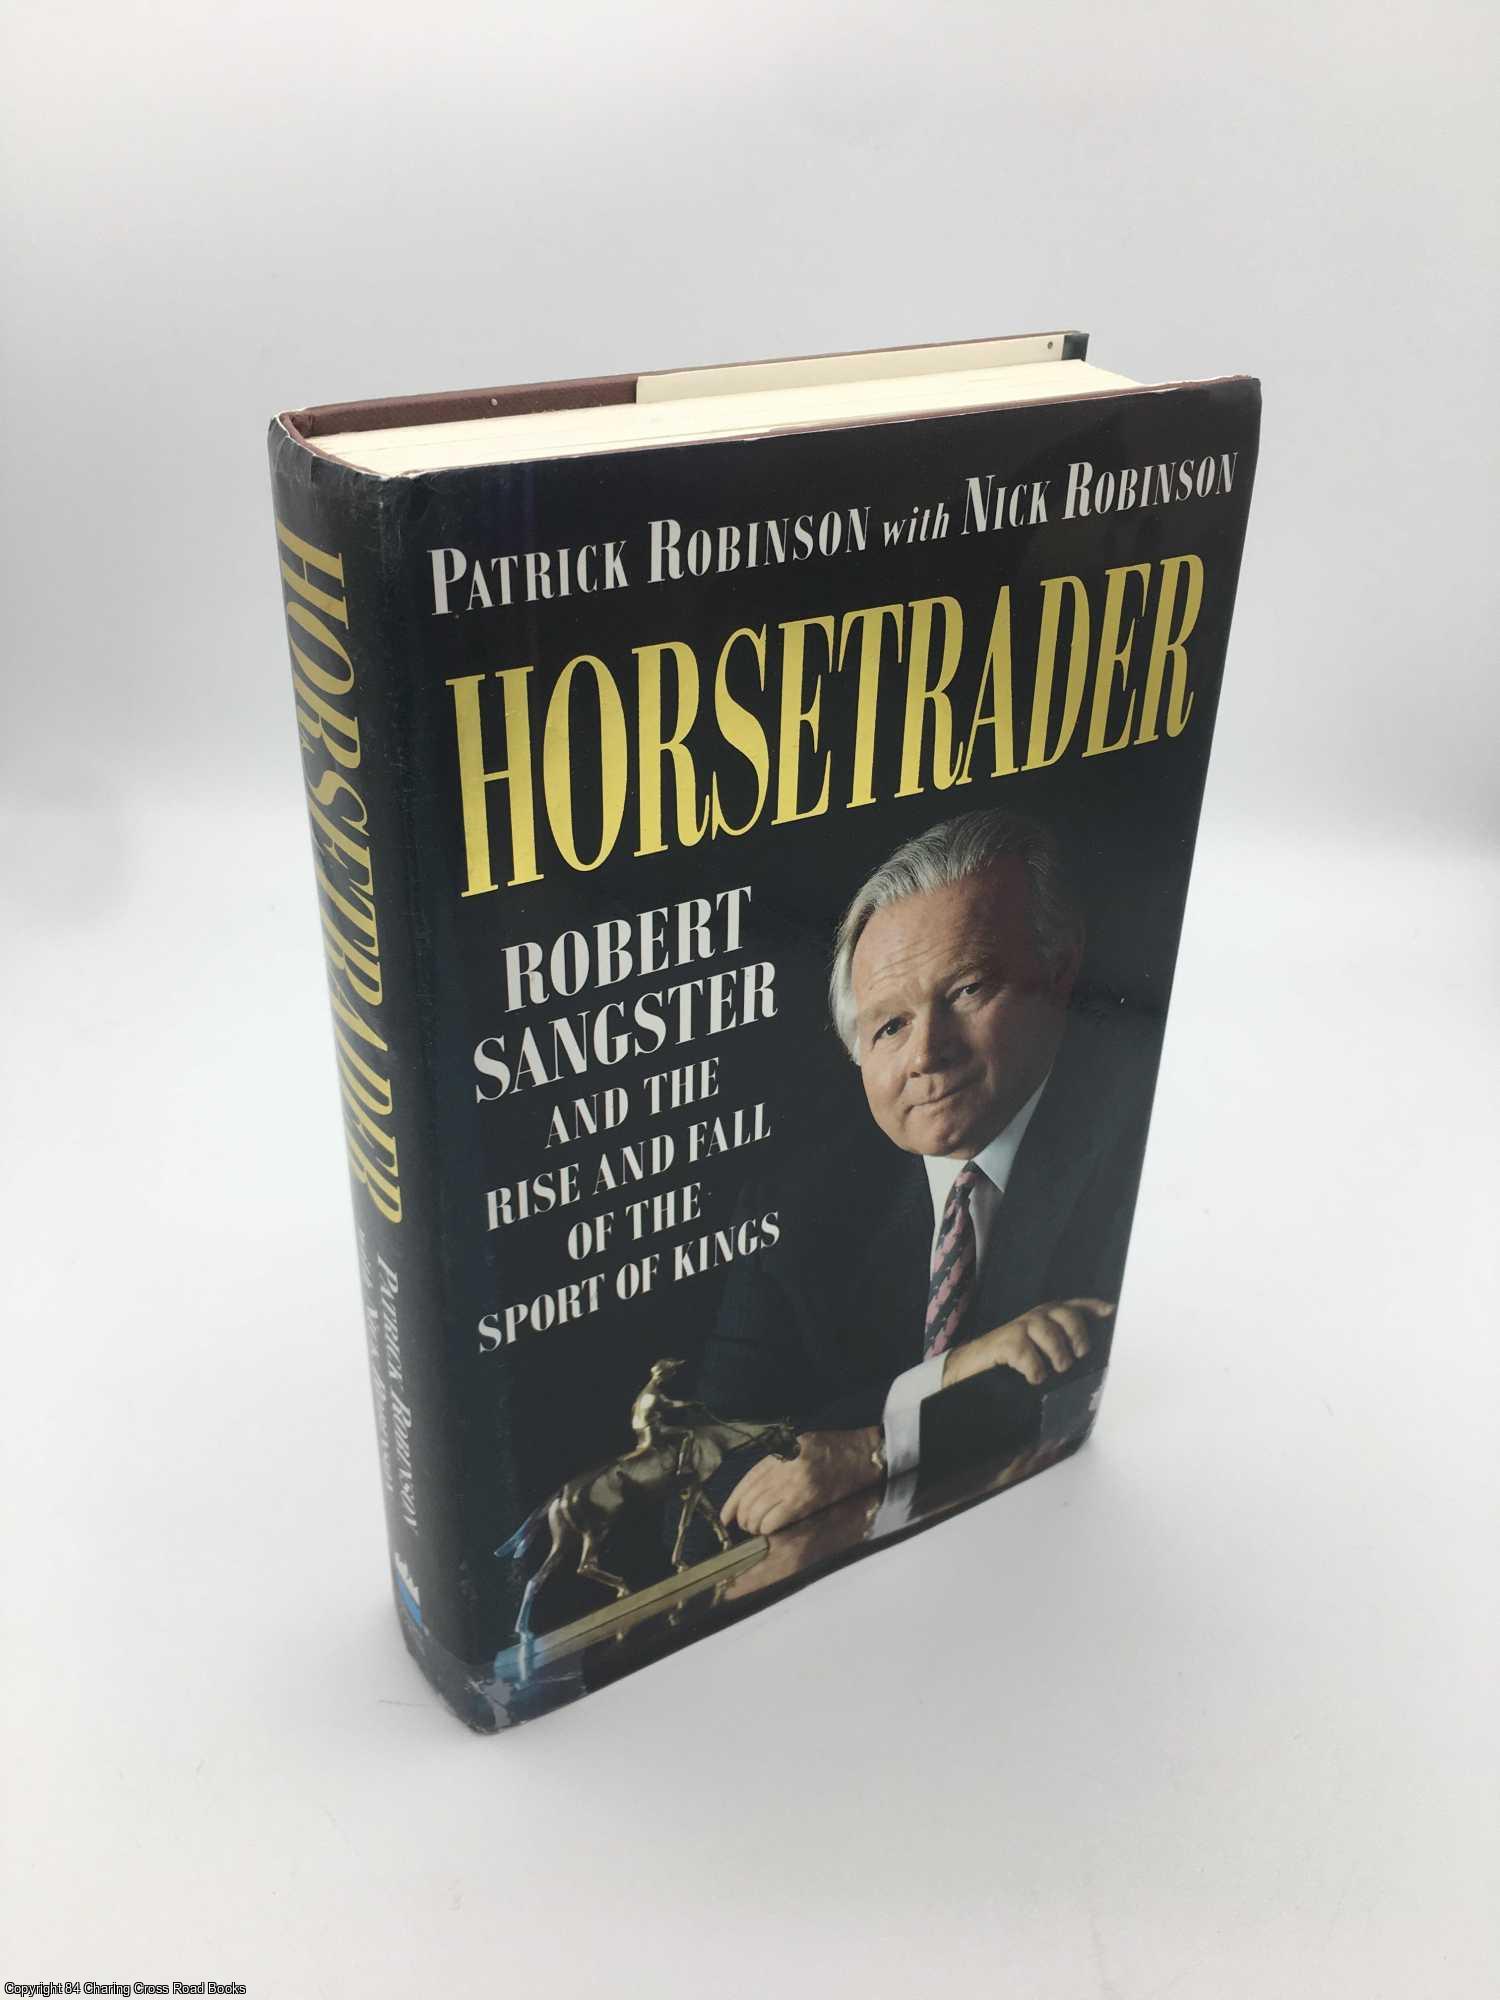 Robinson, Patrick - Horsetrader: Robert Sangster and the Rise and Fall of the Sport of Kings